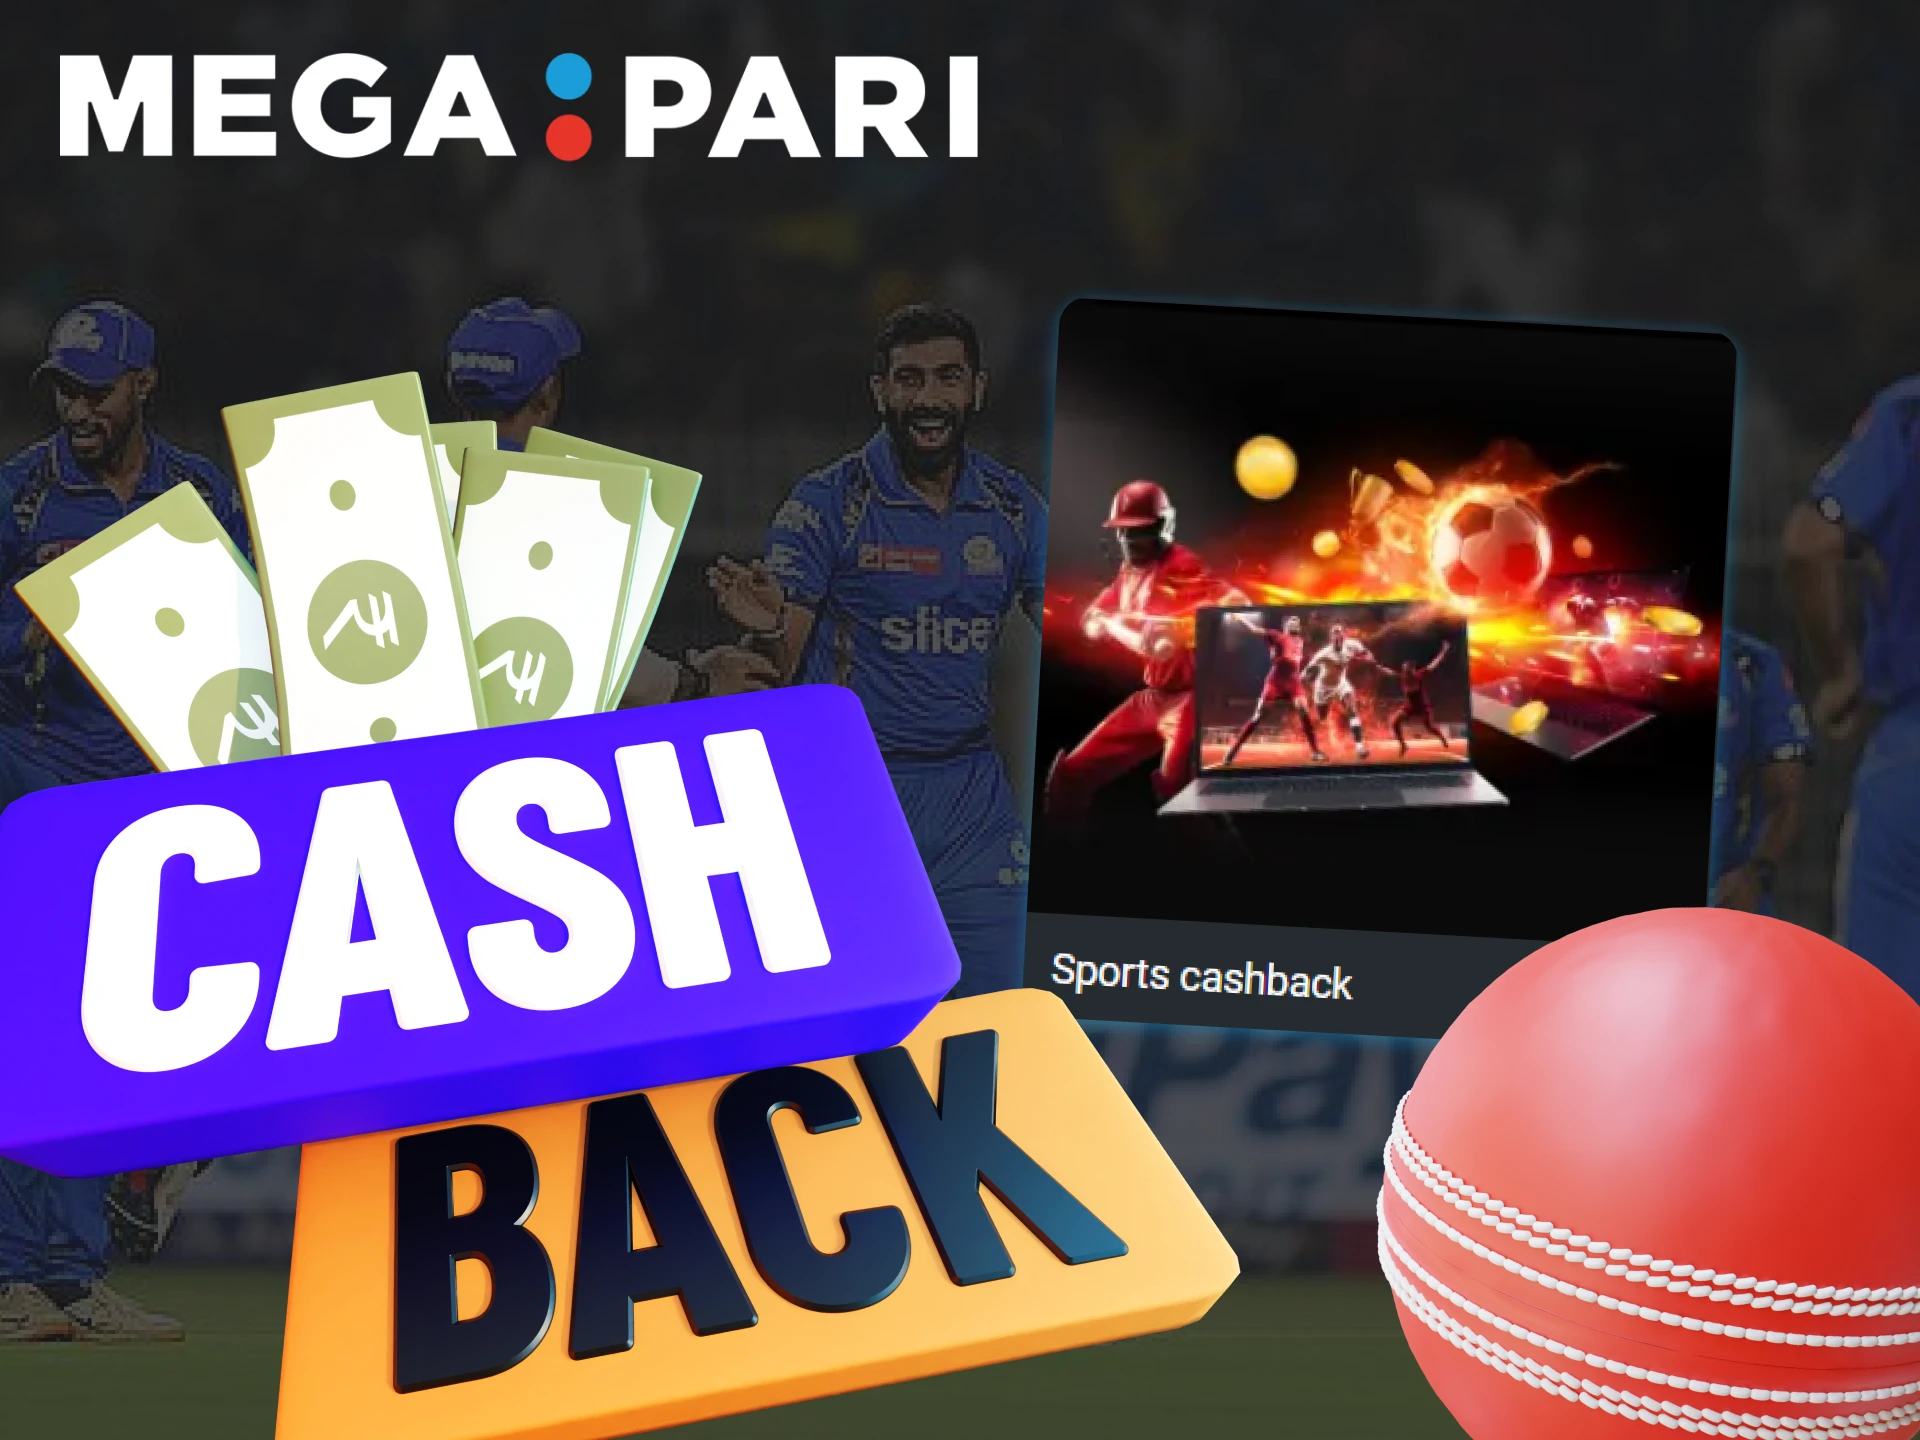 Find out how Megapari users can get a 3% cashback on the total amount they lose on bets in a week.